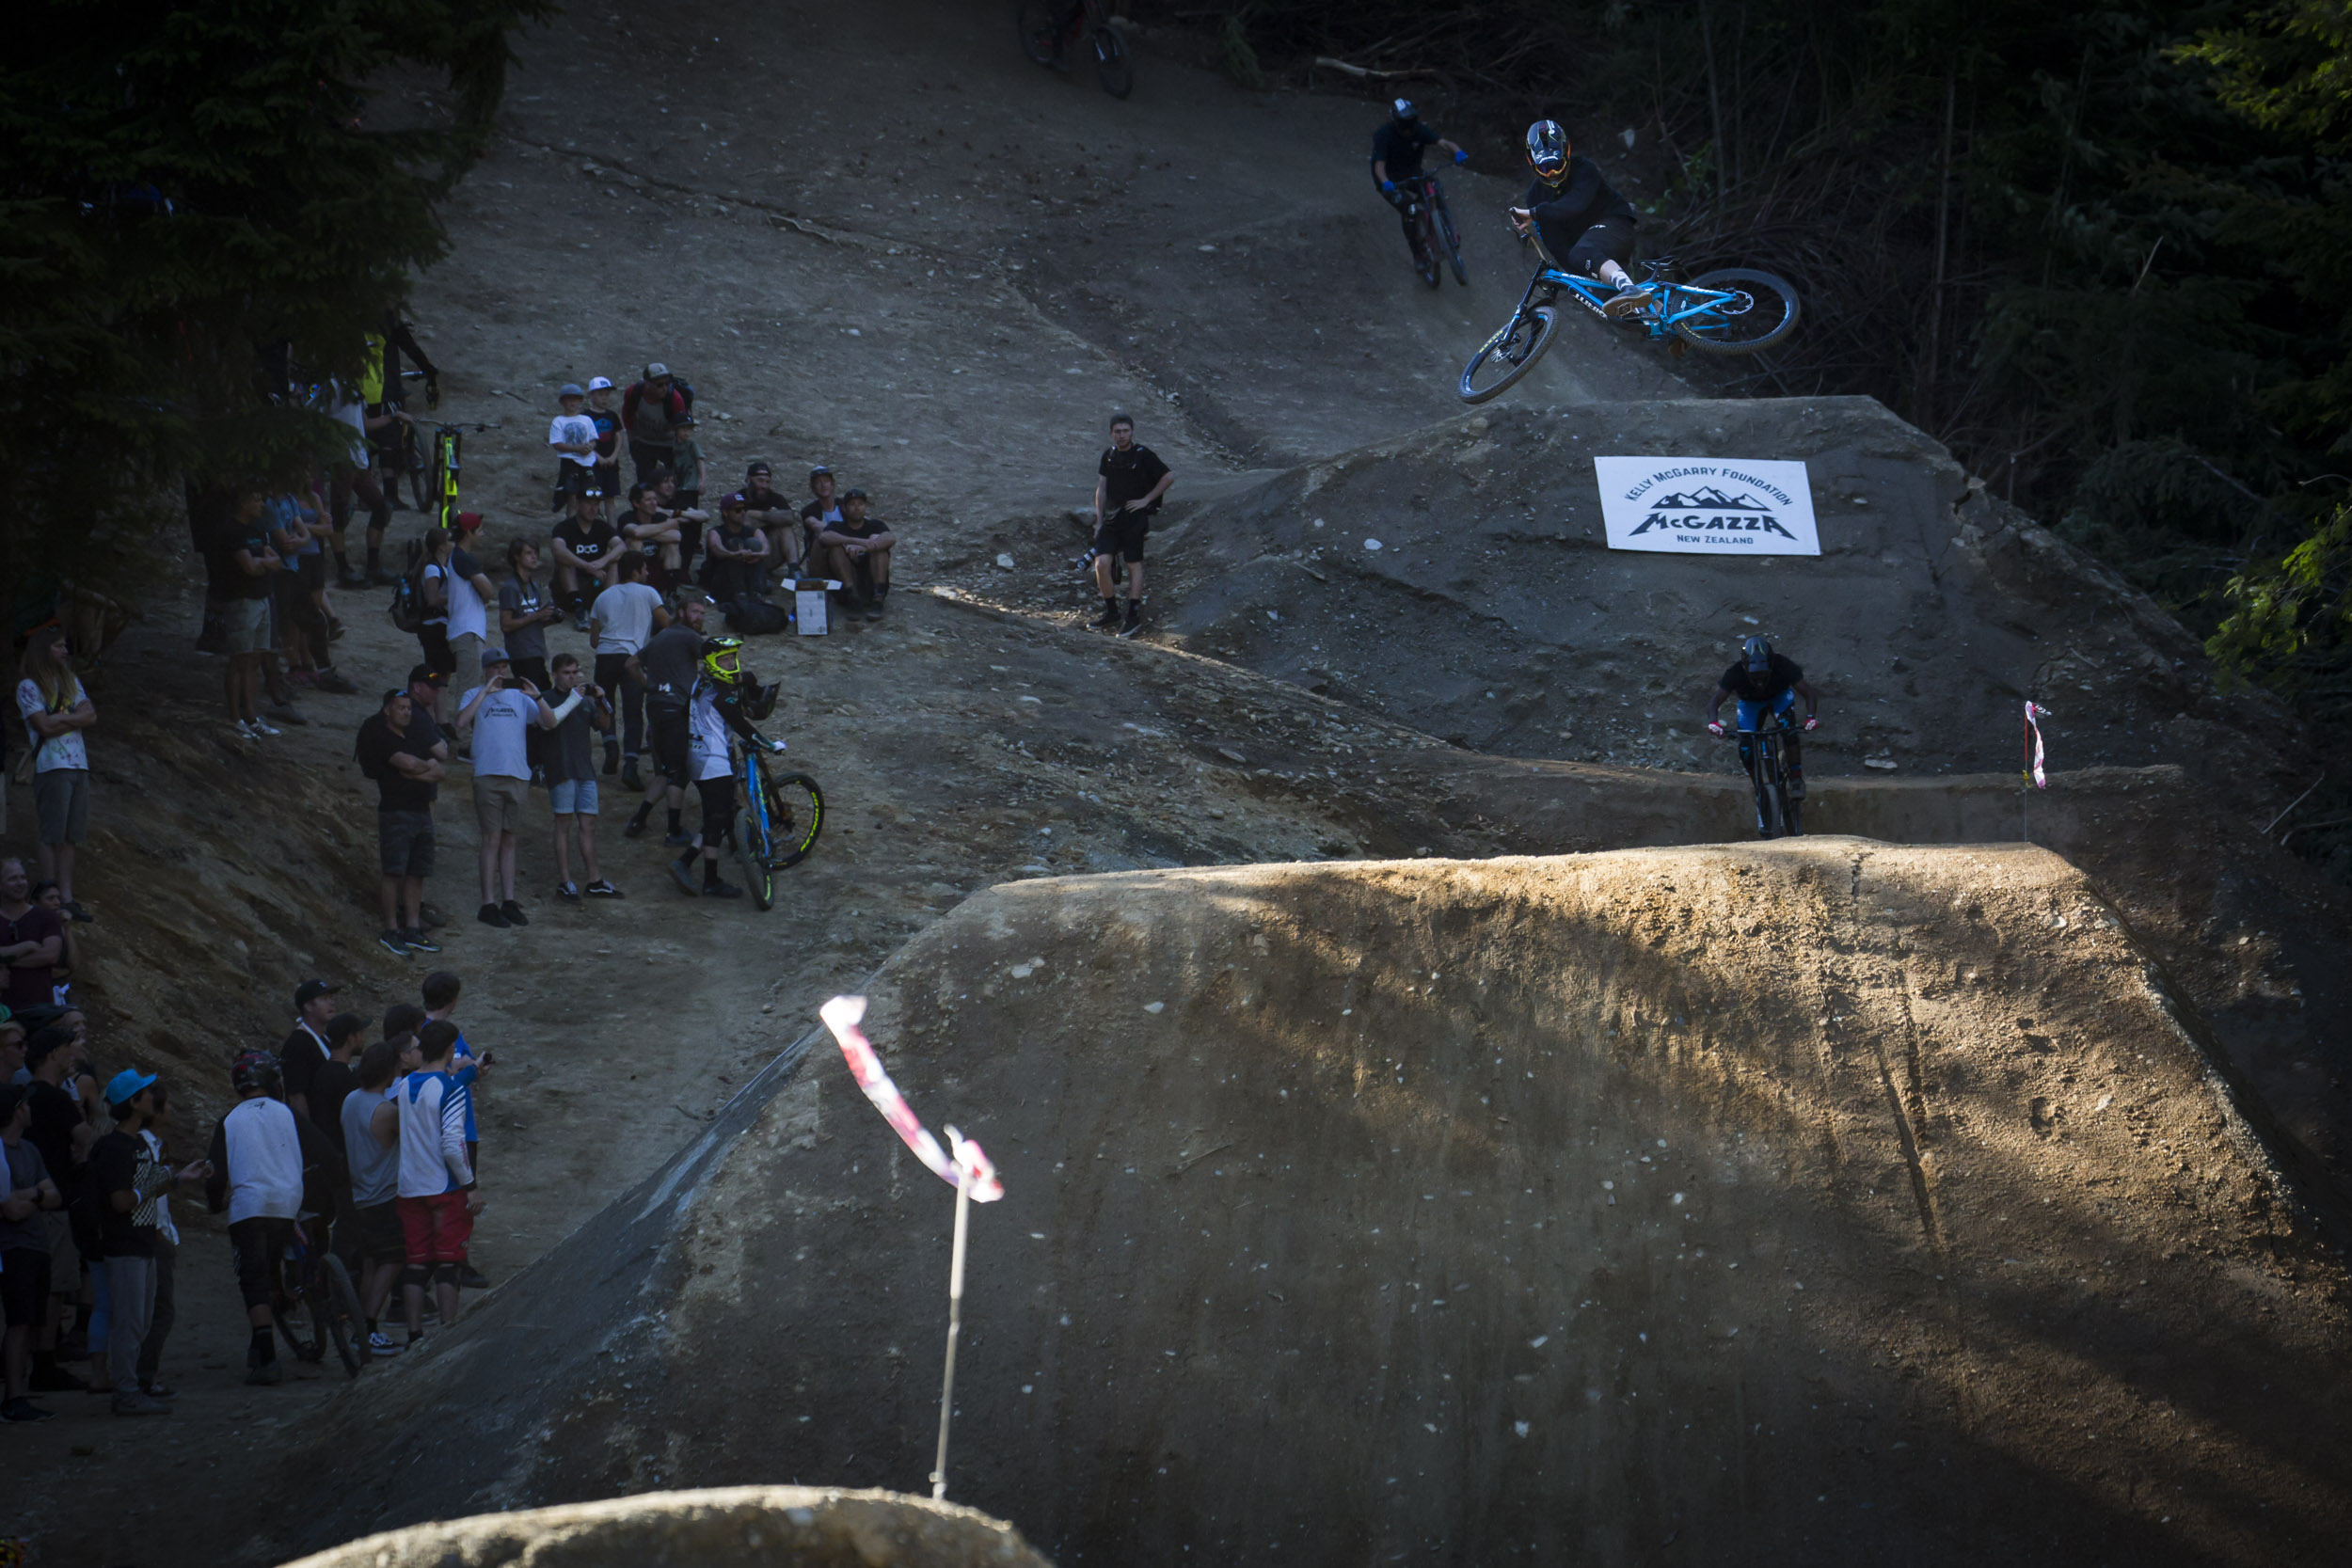 Laying it down for the Kiwis, local Queenstown ripper Joel 'Runga' Tunbridge with whip #3